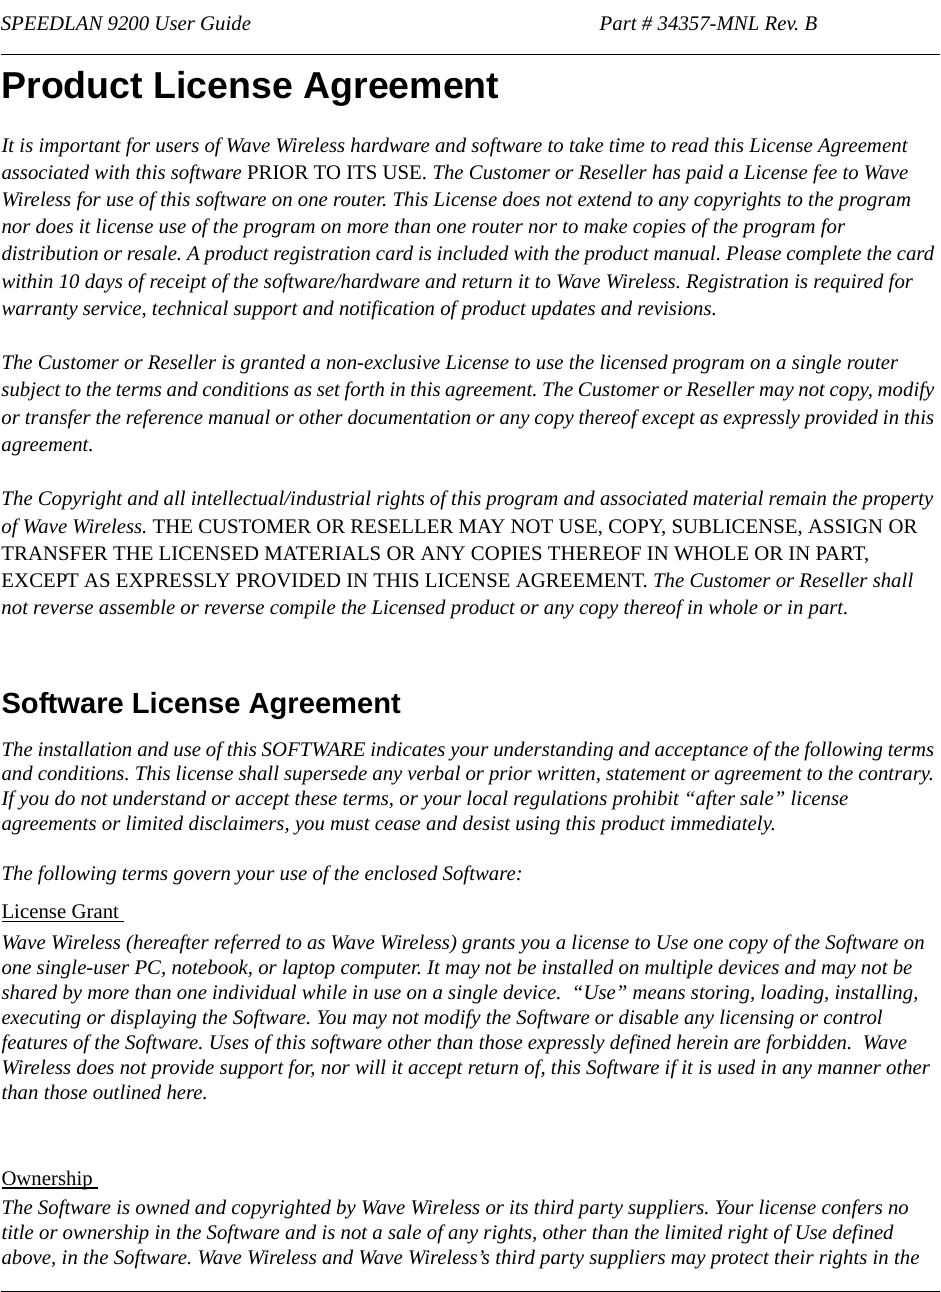 SPEEDLAN 9200 User Guide                                                                   Part # 34357-MNL Rev. B                                            Product License Agreement It is important for users of Wave Wireless hardware and software to take time to read this License Agreement associated with this software PRIOR TO ITS USE. The Customer or Reseller has paid a License fee to Wave Wireless for use of this software on one router. This License does not extend to any copyrights to the program nor does it license use of the program on more than one router nor to make copies of the program for distribution or resale. A product registration card is included with the product manual. Please complete the card within 10 days of receipt of the software/hardware and return it to Wave Wireless. Registration is required for warranty service, technical support and notification of product updates and revisions.  The Customer or Reseller is granted a non-exclusive License to use the licensed program on a single router subject to the terms and conditions as set forth in this agreement. The Customer or Reseller may not copy, modify or transfer the reference manual or other documentation or any copy thereof except as expressly provided in this agreement. The Copyright and all intellectual/industrial rights of this program and associated material remain the property of Wave Wireless. THE CUSTOMER OR RESELLER MAY NOT USE, COPY, SUBLICENSE, ASSIGN OR TRANSFER THE LICENSED MATERIALS OR ANY COPIES THEREOF IN WHOLE OR IN PART, EXCEPT AS EXPRESSLY PROVIDED IN THIS LICENSE AGREEMENT. The Customer or Reseller shall not reverse assemble or reverse compile the Licensed product or any copy thereof in whole or in part.   Software License AgreementThe installation and use of this SOFTWARE indicates your understanding and acceptance of the following terms and conditions. This license shall supersede any verbal or prior written, statement or agreement to the contrary. If you do not understand or accept these terms, or your local regulations prohibit “after sale” license agreements or limited disclaimers, you must cease and desist using this product immediately. The following terms govern your use of the enclosed Software:License Grant Wave Wireless (hereafter referred to as Wave Wireless) grants you a license to Use one copy of the Software on one single-user PC, notebook, or laptop computer. It may not be installed on multiple devices and may not be shared by more than one individual while in use on a single device.  “Use” means storing, loading, installing, executing or displaying the Software. You may not modify the Software or disable any licensing or control features of the Software. Uses of this software other than those expressly defined herein are forbidden.  Wave Wireless does not provide support for, nor will it accept return of, this Software if it is used in any manner other than those outlined here.Ownership The Software is owned and copyrighted by Wave Wireless or its third party suppliers. Your license confers no title or ownership in the Software and is not a sale of any rights, other than the limited right of Use defined above, in the Software. Wave Wireless and Wave Wireless’s third party suppliers may protect their rights in the              